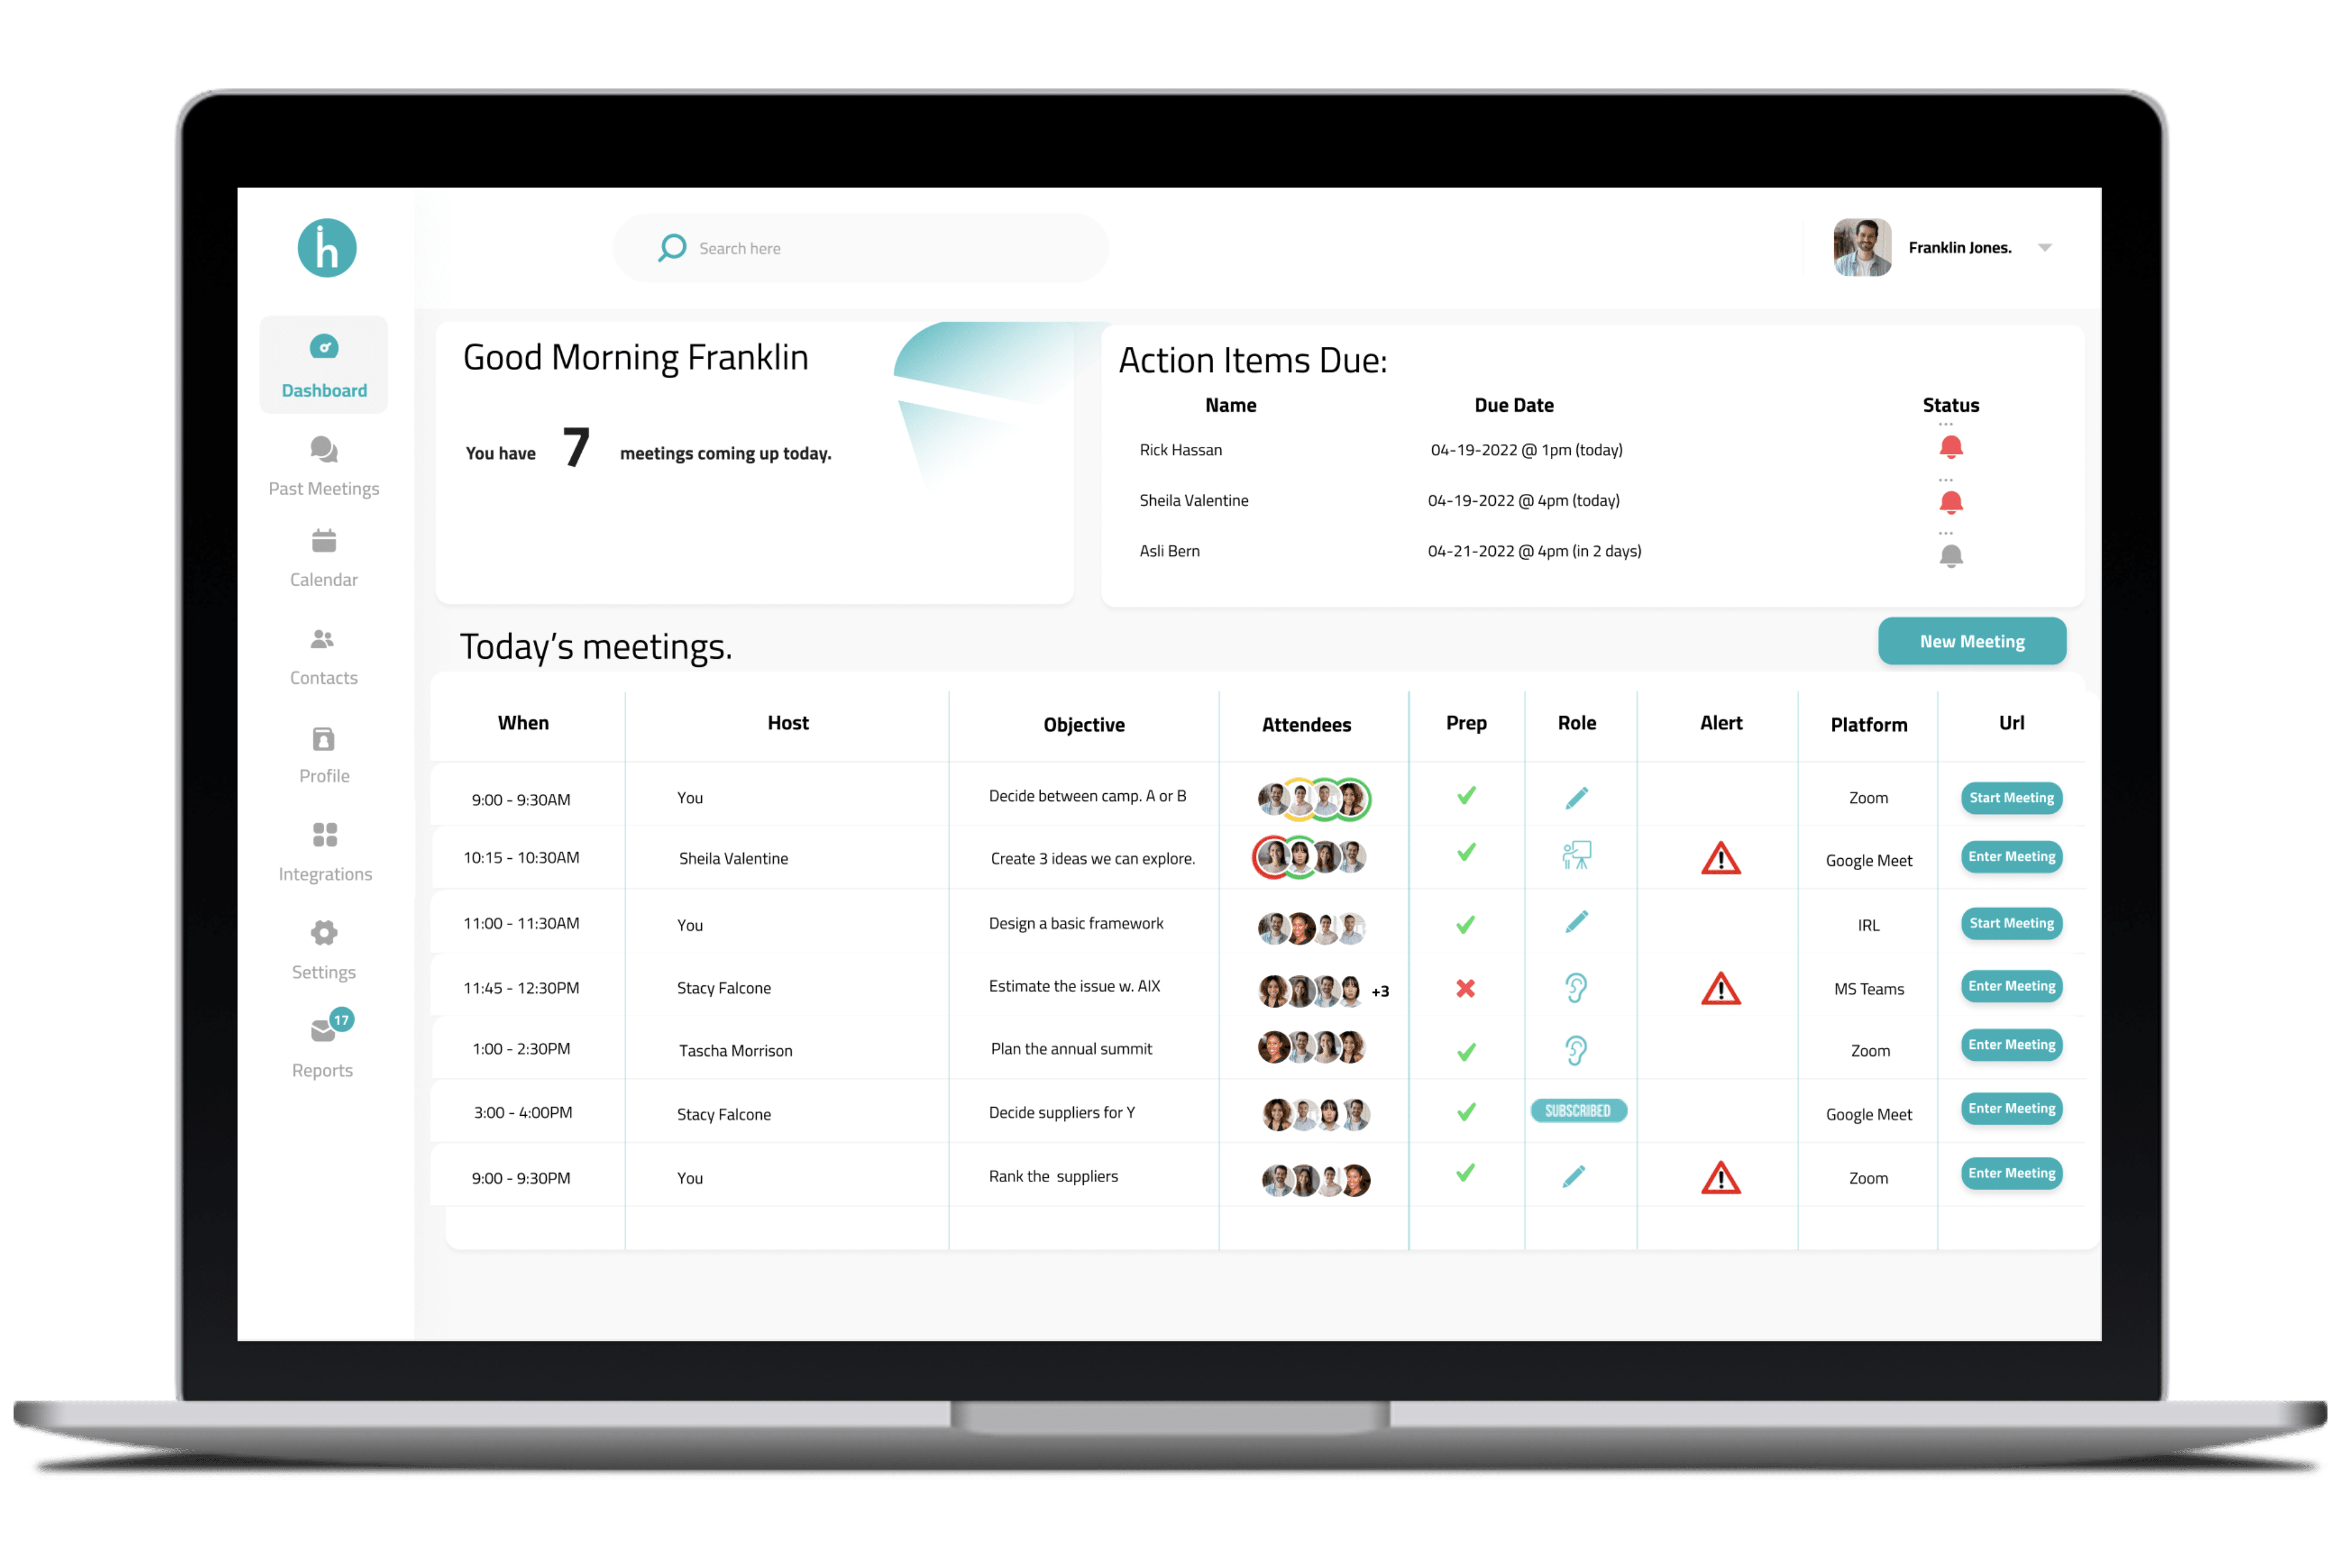 Experience the power of Happioh's meeting management platform with our intuitive dashboard. Get an overview of all your upcoming meetings, manage your agenda, assign action items, and track progress - all in one place. With a streamlined user interface, our dashboard simplifies meeting management and helps you save time, increase productivity, and stay organized. Try Happioh today and transform the way you work.